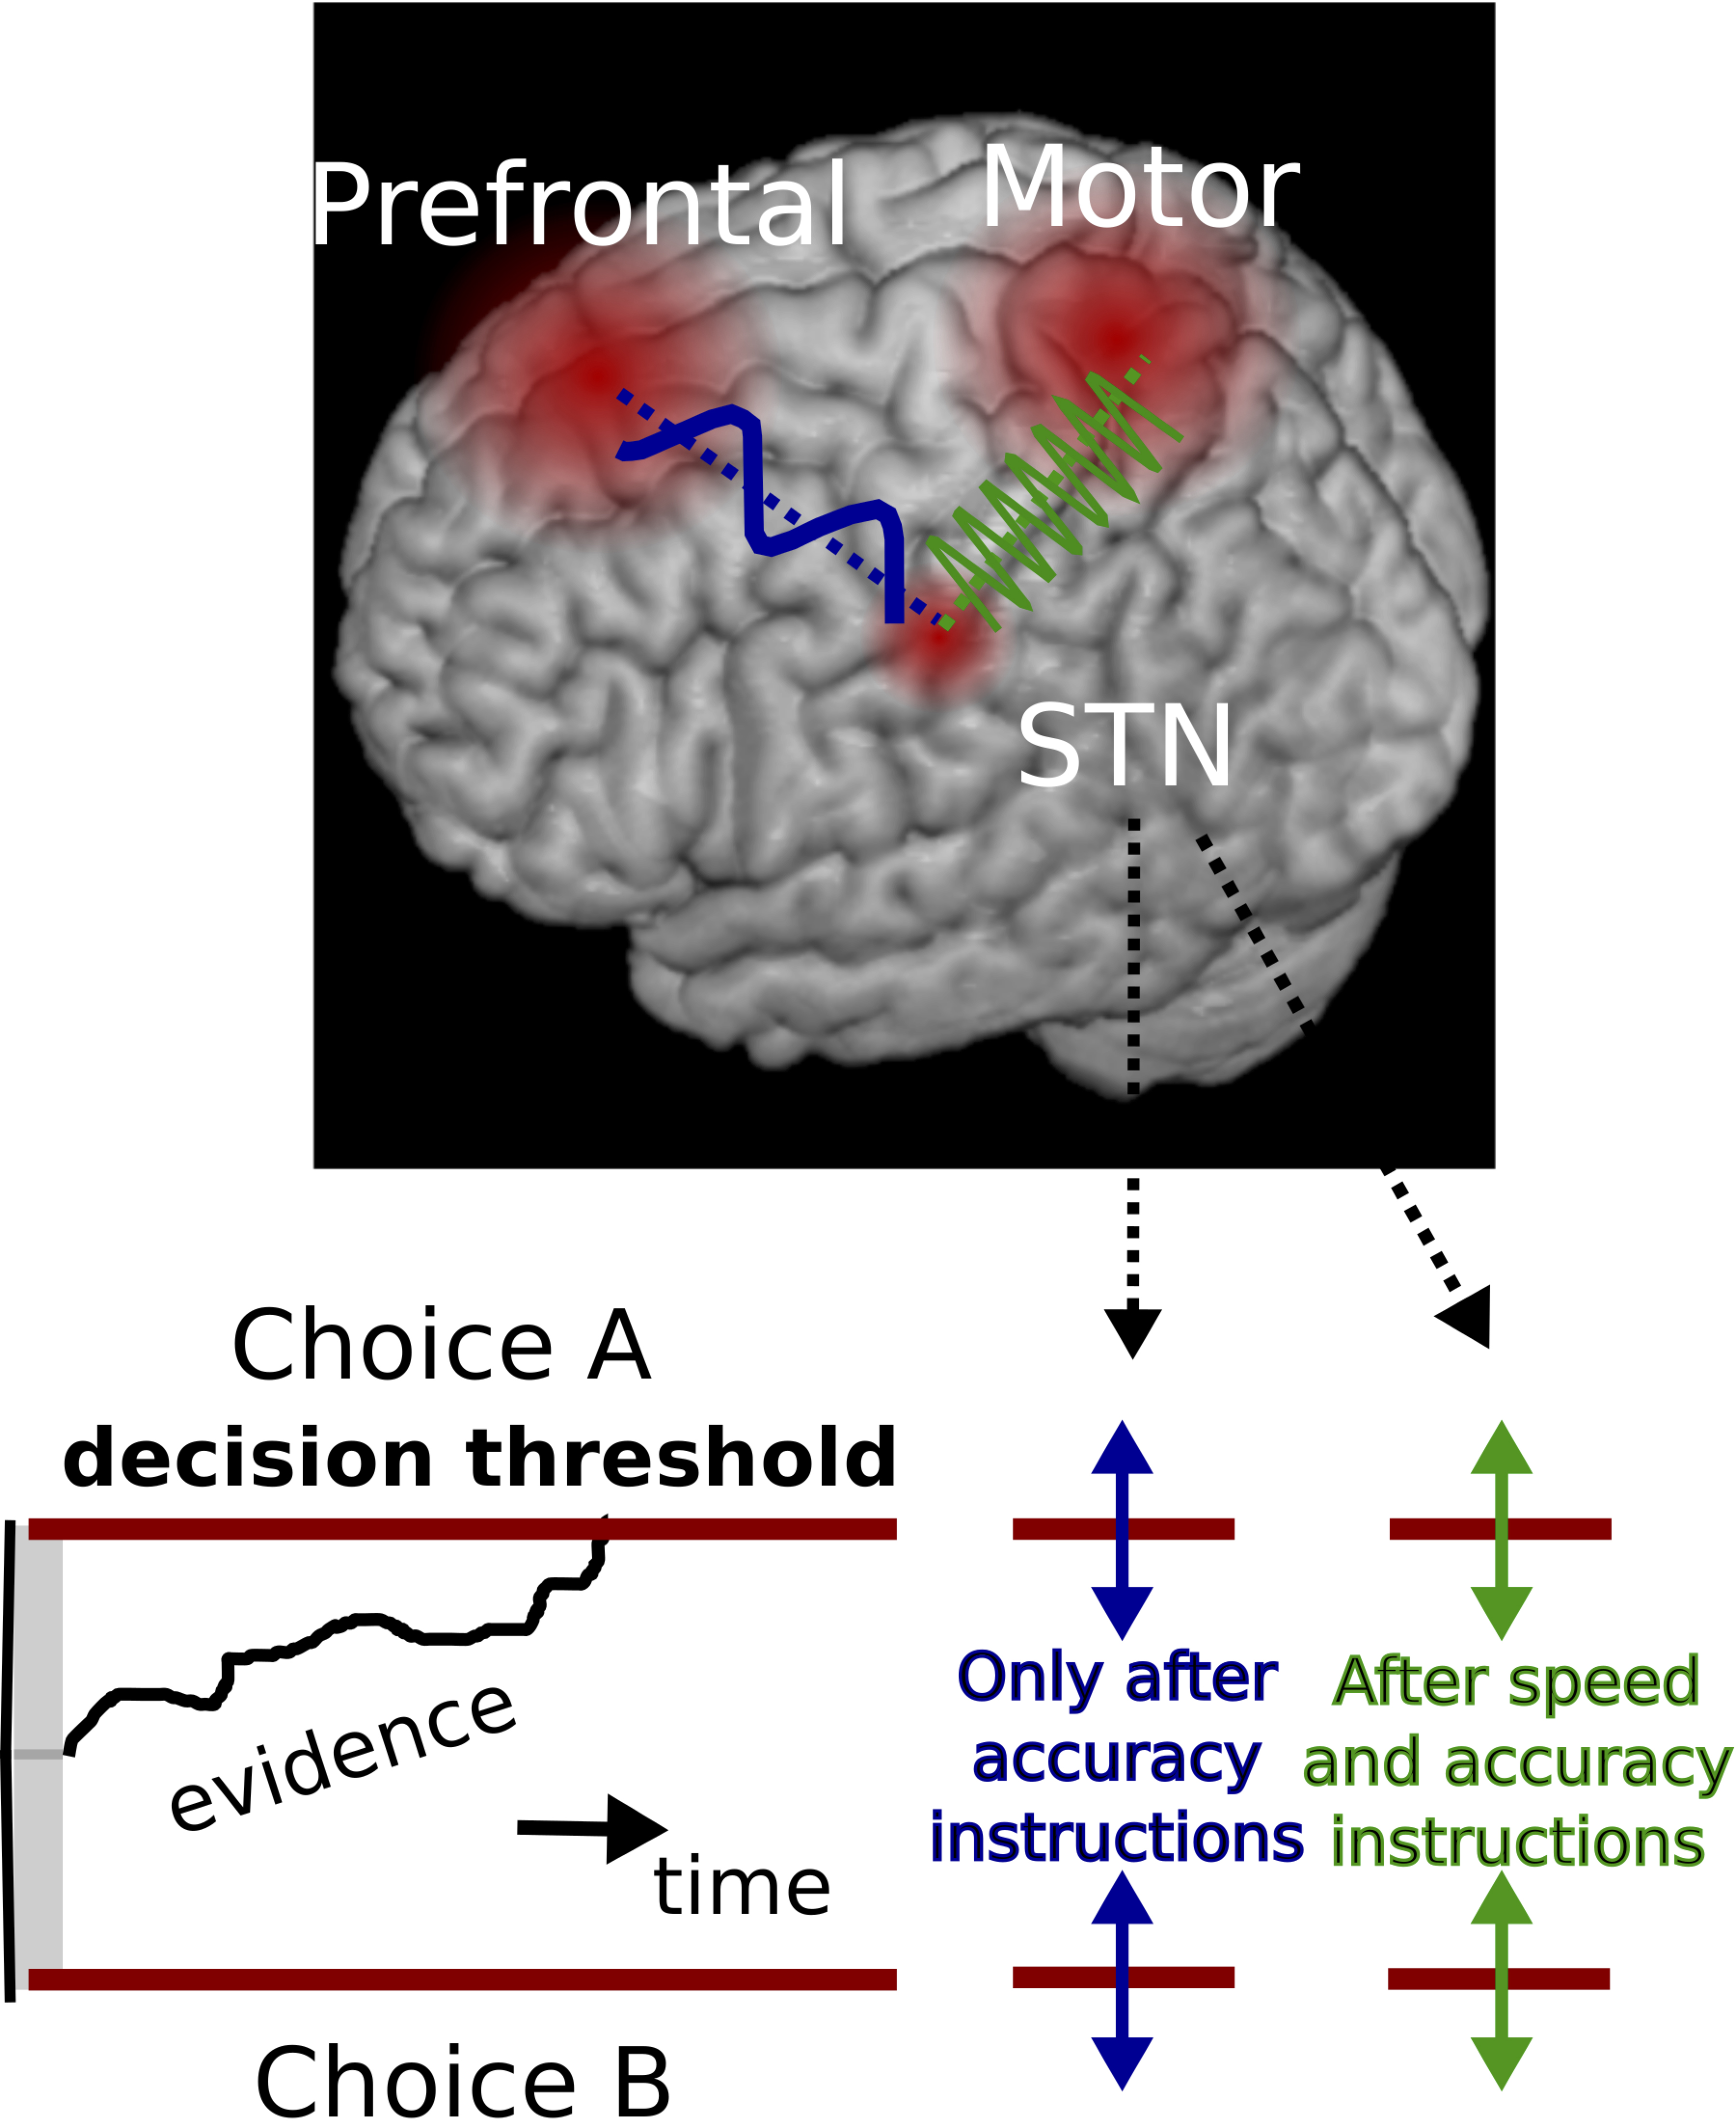 The subthalamic nucleus (STN) switches its interactions with two different cortical circuits (prefrontal cortex in blue, and motor cortex in green) to affect decision-making plans.